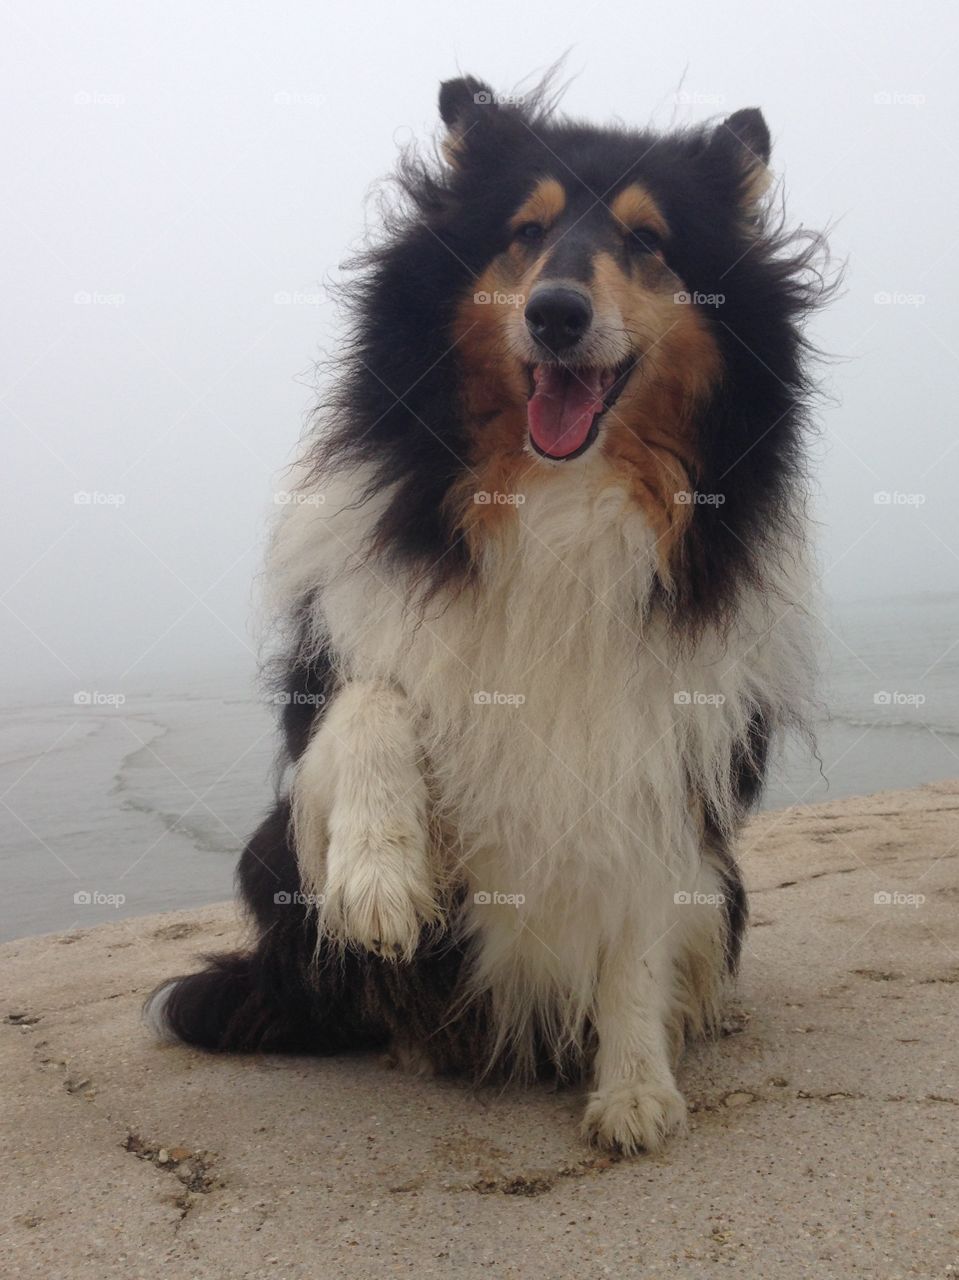 My collie dog Candy  at the beach, sitting on a pier on the sea and close to water in a foggy morning near the shore